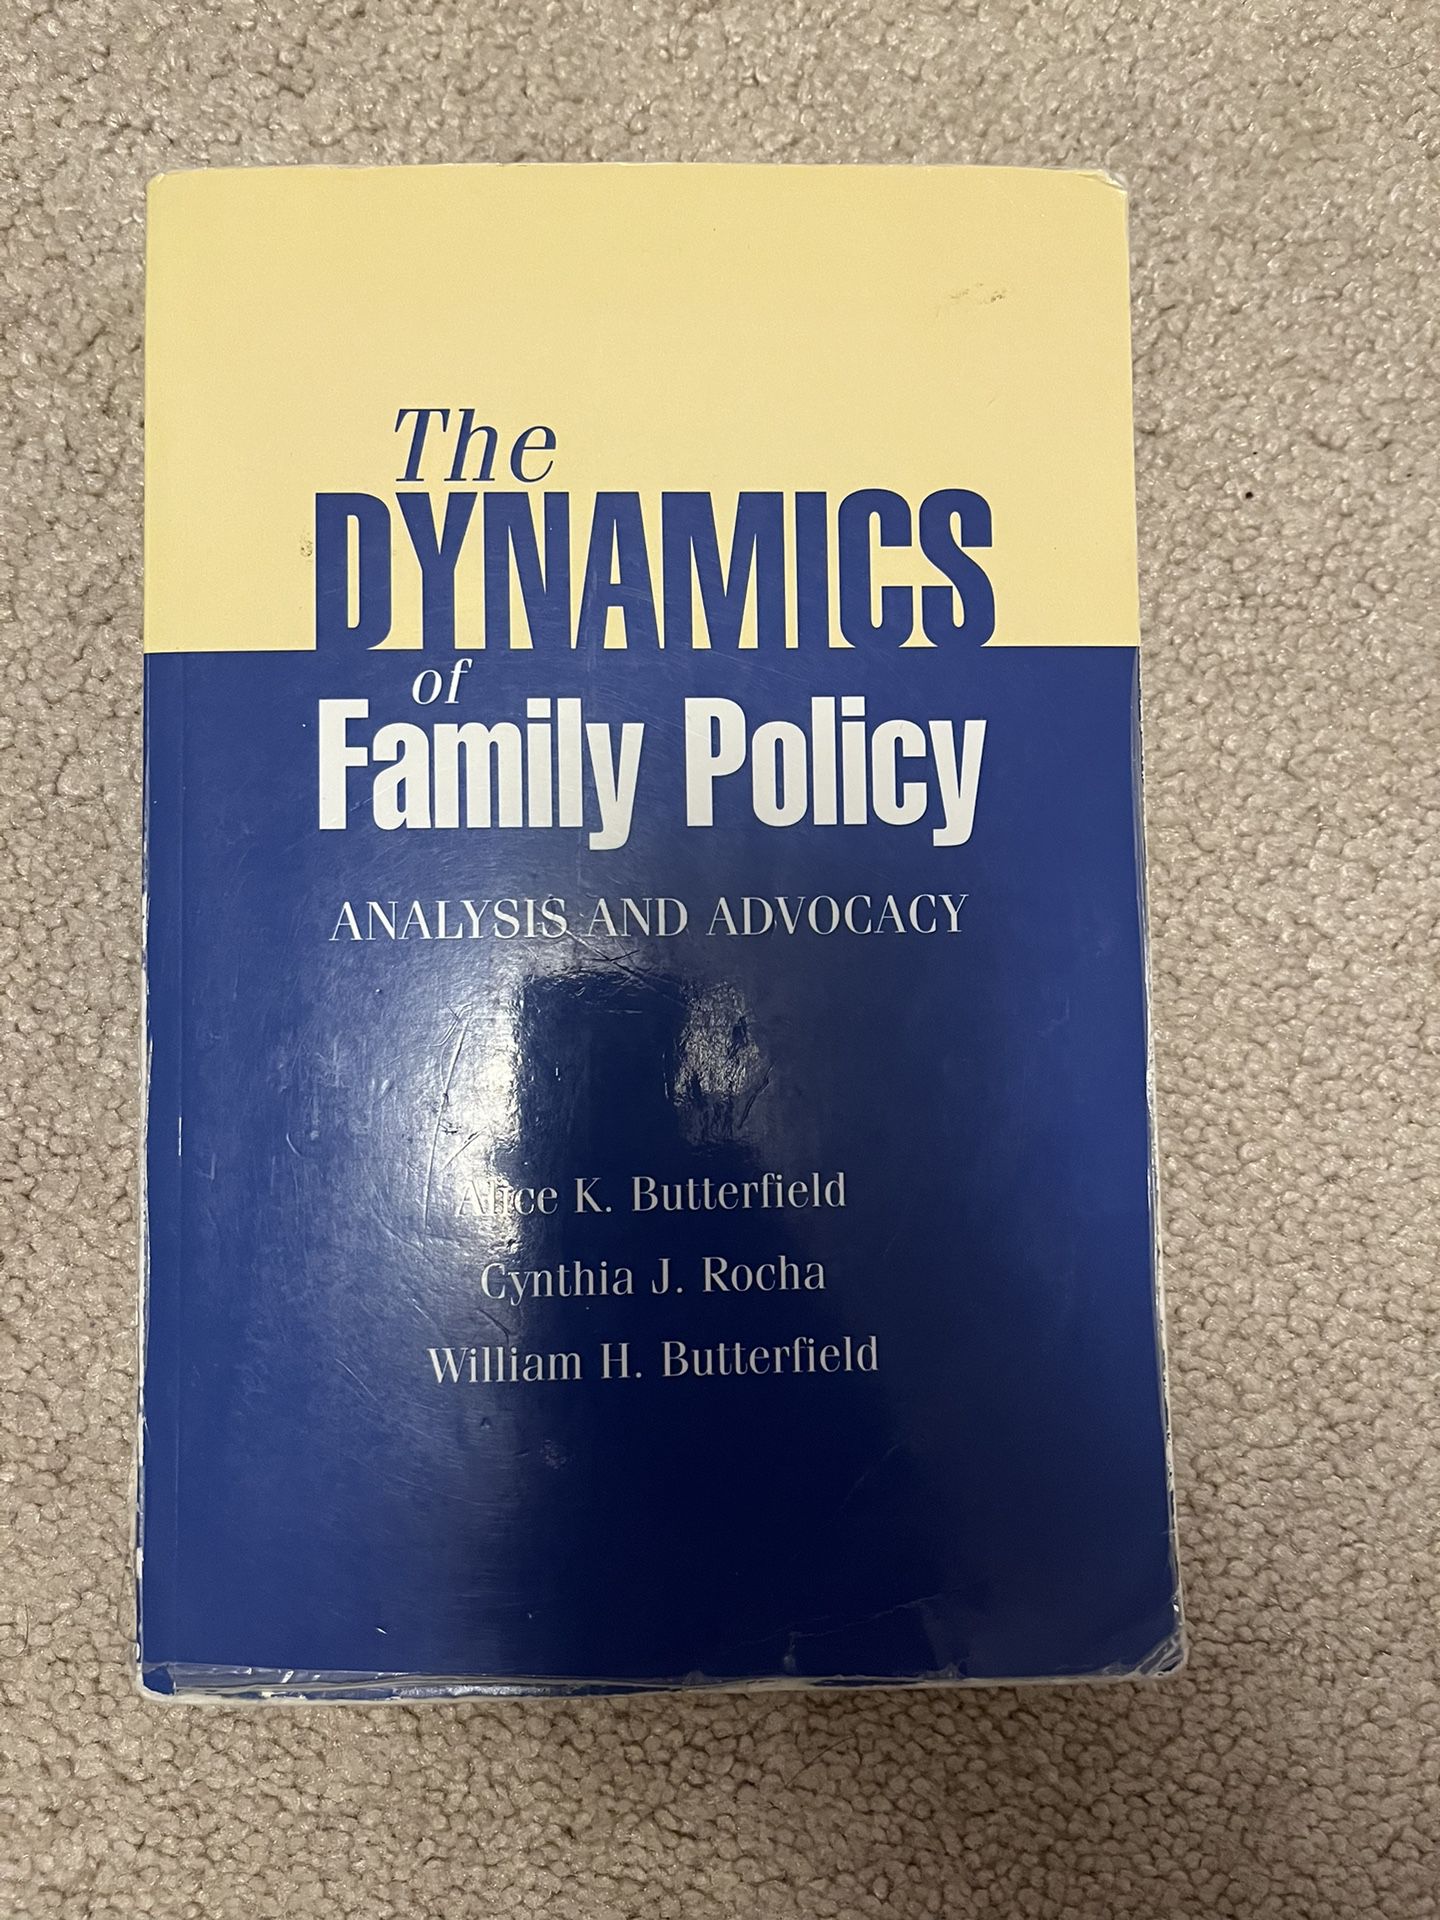 The Dynamics of Family Policy: Analysis and Advocacy